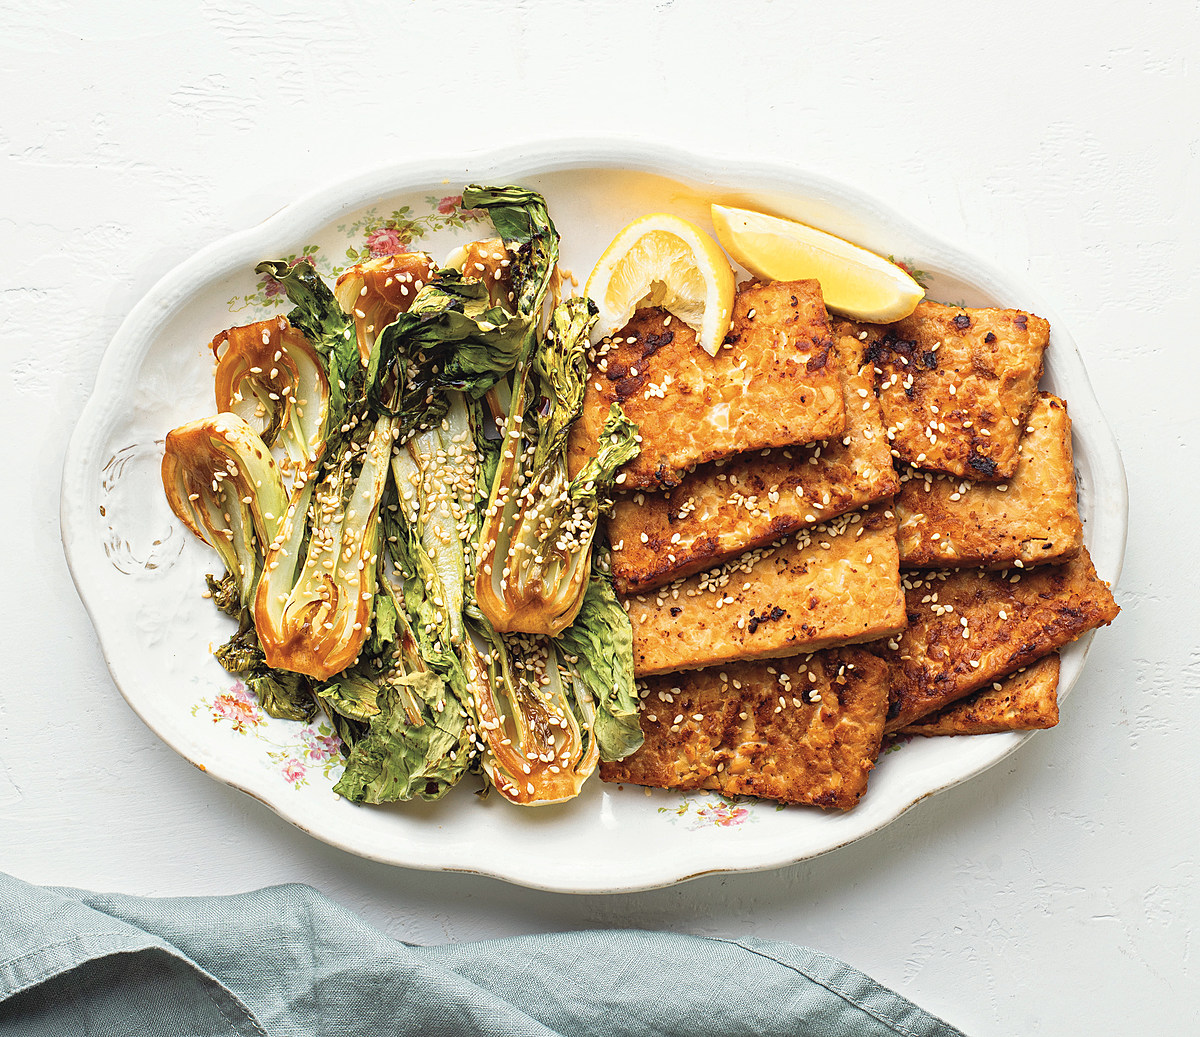 Recipe of the Day: Miso-Mustard Tempeh with Roasted Baby Bok Choy | The ...